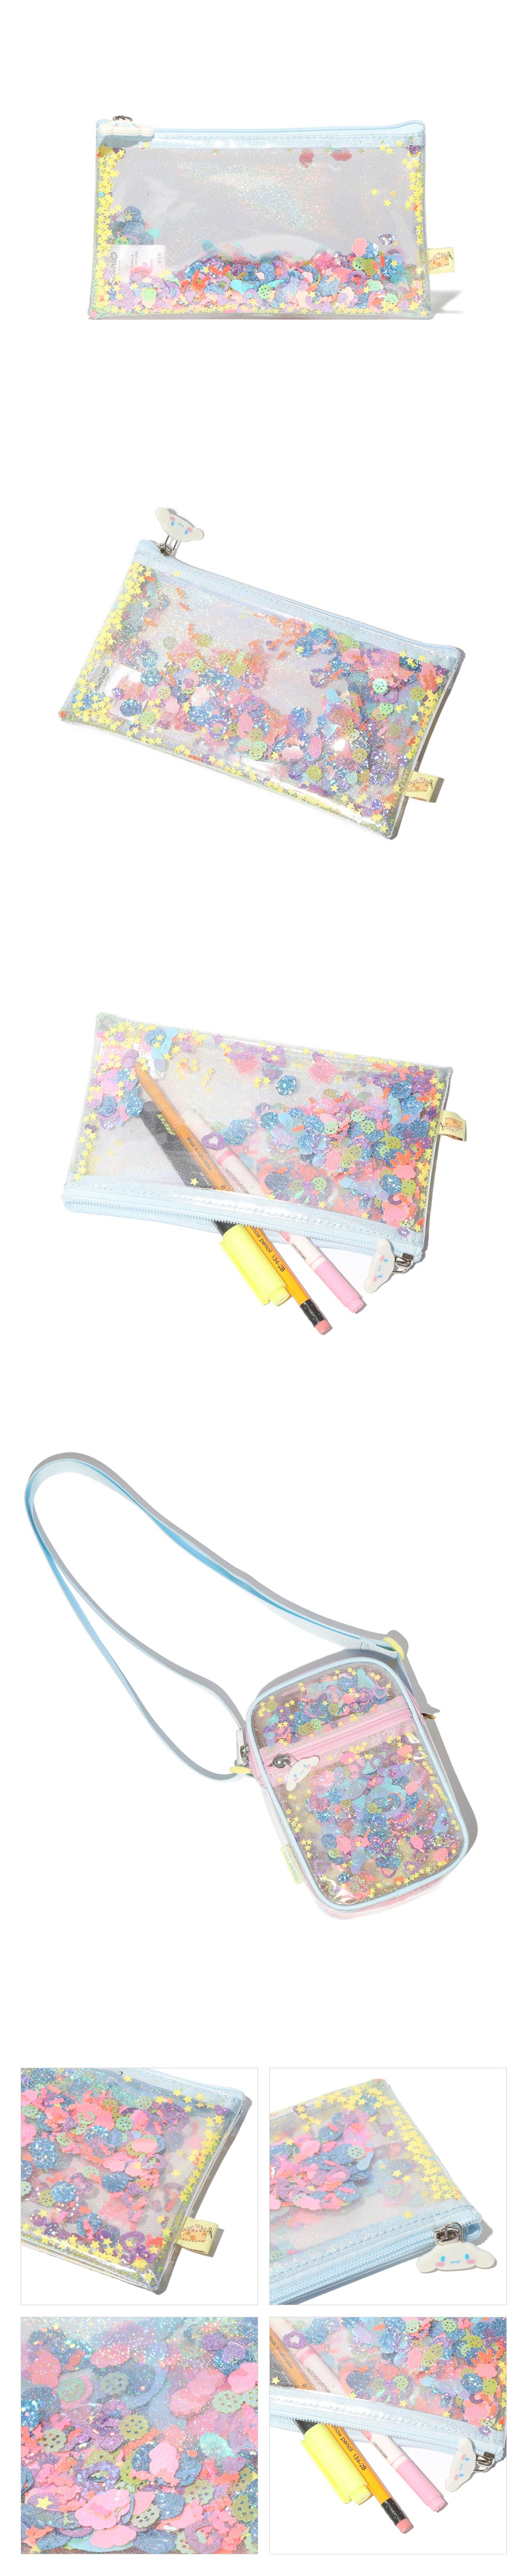 Stitcheese Cinnamoroll Double Twinkle Pencilcase (Blue)